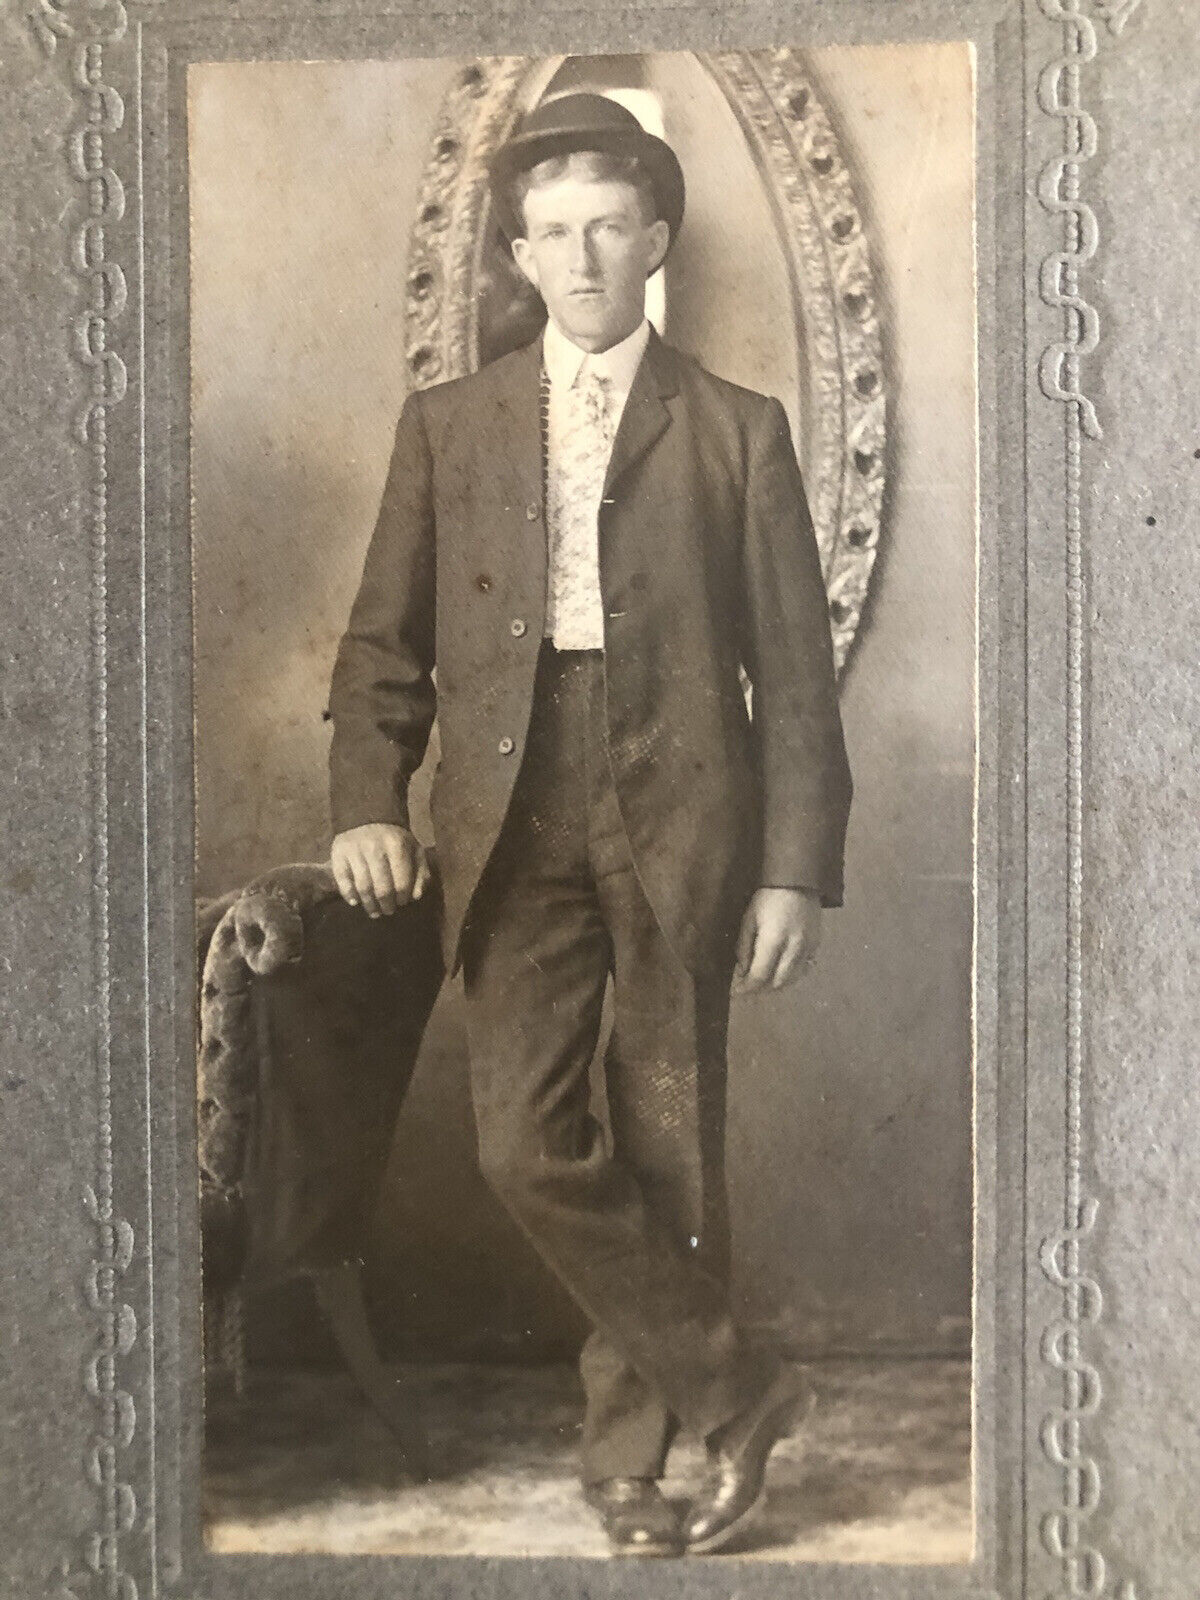 Very striking handsome young man cabinet photo - full length portrait - Gatsby